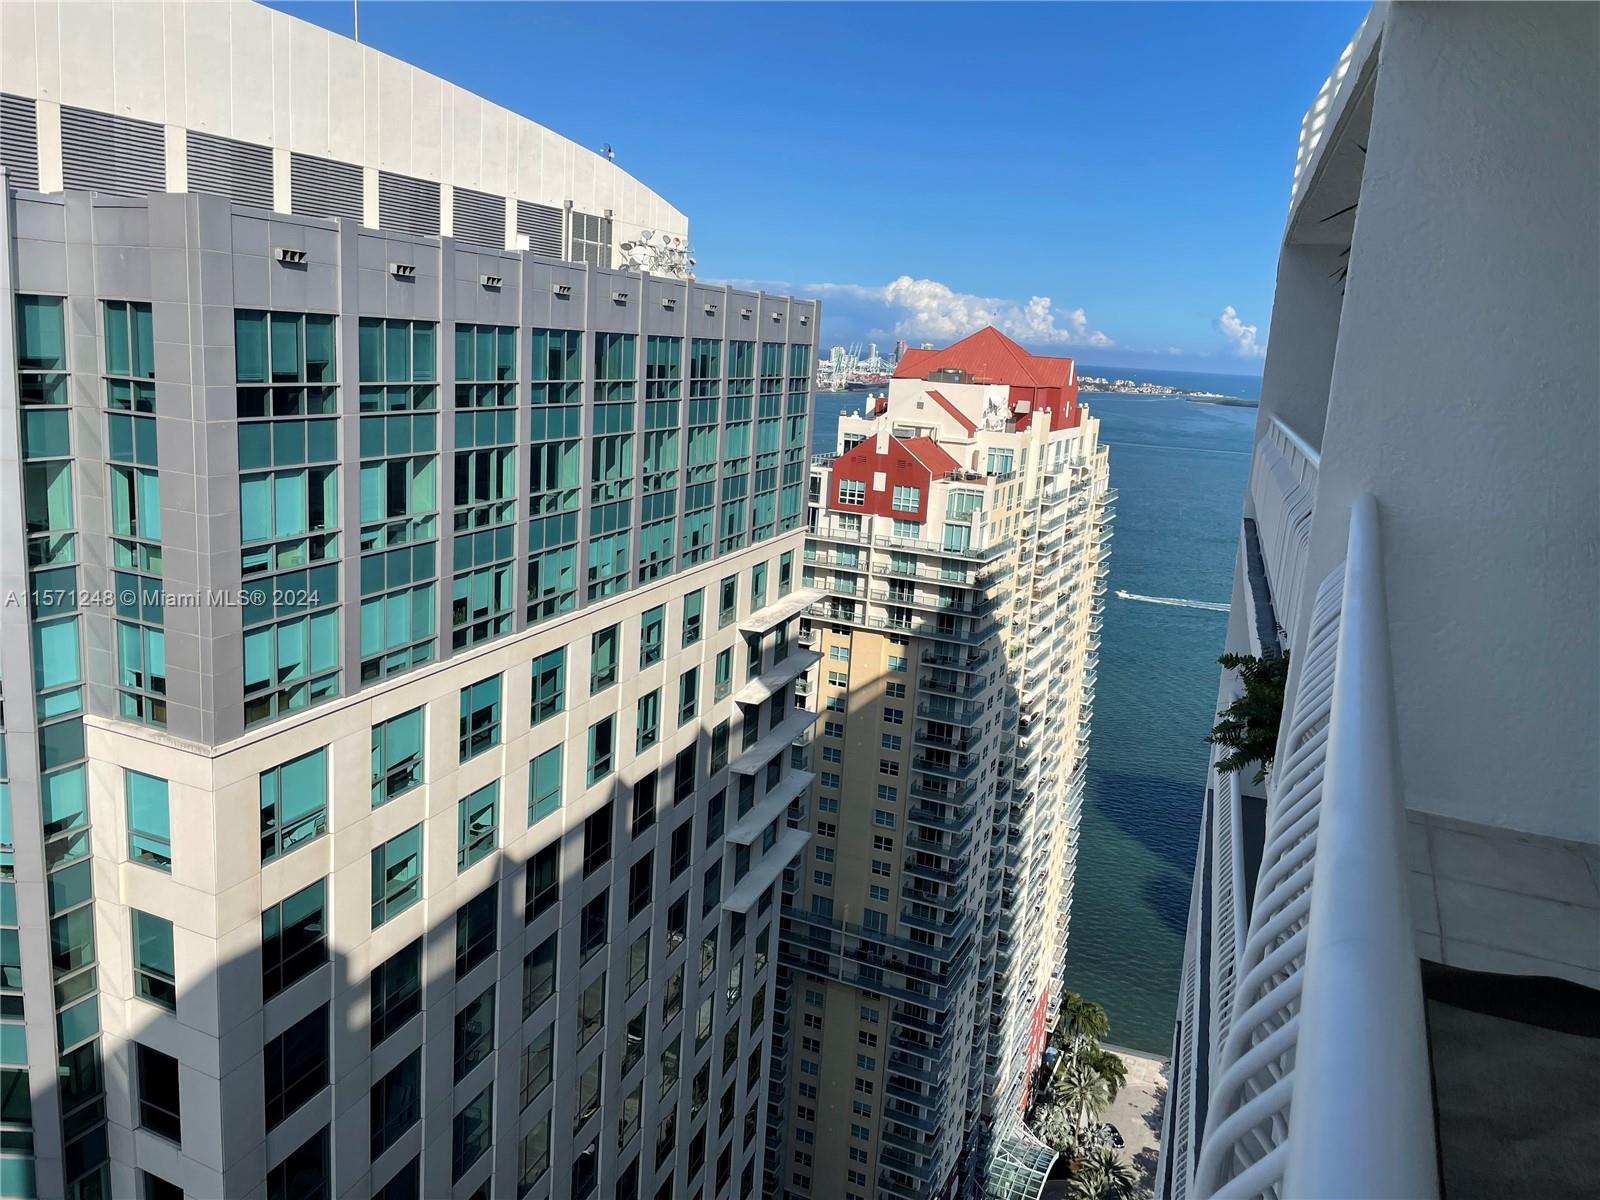 Investor's Dream in Miami's Heart! Welcome to this chic one-bedroom, one-bathroom penthouse apartment nestled in Miami's vibrant landscape. Enjoy sweeping south views of the Miami/Brickell skyline and water, promising immediate income from short-term rentals in a building allowing AIRBNB rentals. Perfect for seasoned investors or first-time buyers, this unit guarantees a high return on investment. Dive into luxury with access to pools, jacuzzi, sauna, fitness center, and more, all while low HOA fees cover essential utilities, ensuring a hassle-free lifestyle. Located in Miami's financial district, indulge in convenience with shops, restaurants, and public transportation at your doorstep. Don't miss out on this incredible opportunity.